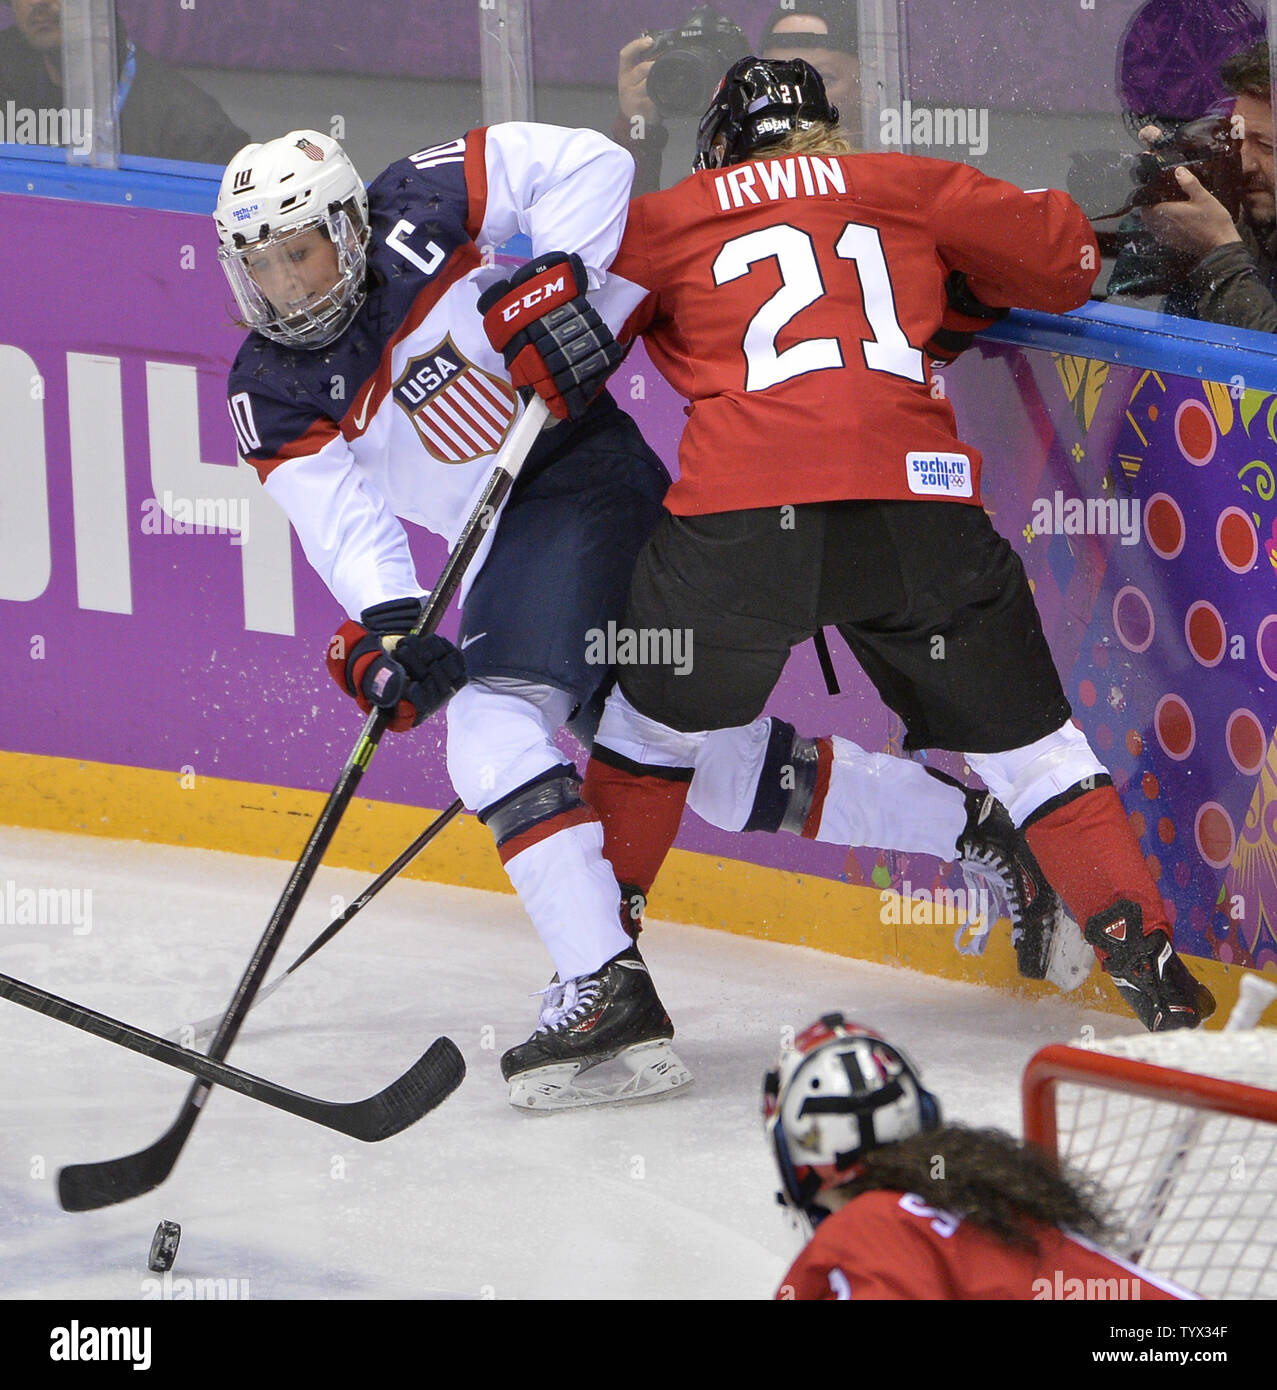 United States' Meghan Duggan (L) makes a pass as Canada's Haley Irwin defends during the first period of the women's gold medal ice hockey game at the Sochi 2014 Winter Olympics on February 20, 2014 in Sochi, Russia.     UPI/Brian Kersey Stock Photo